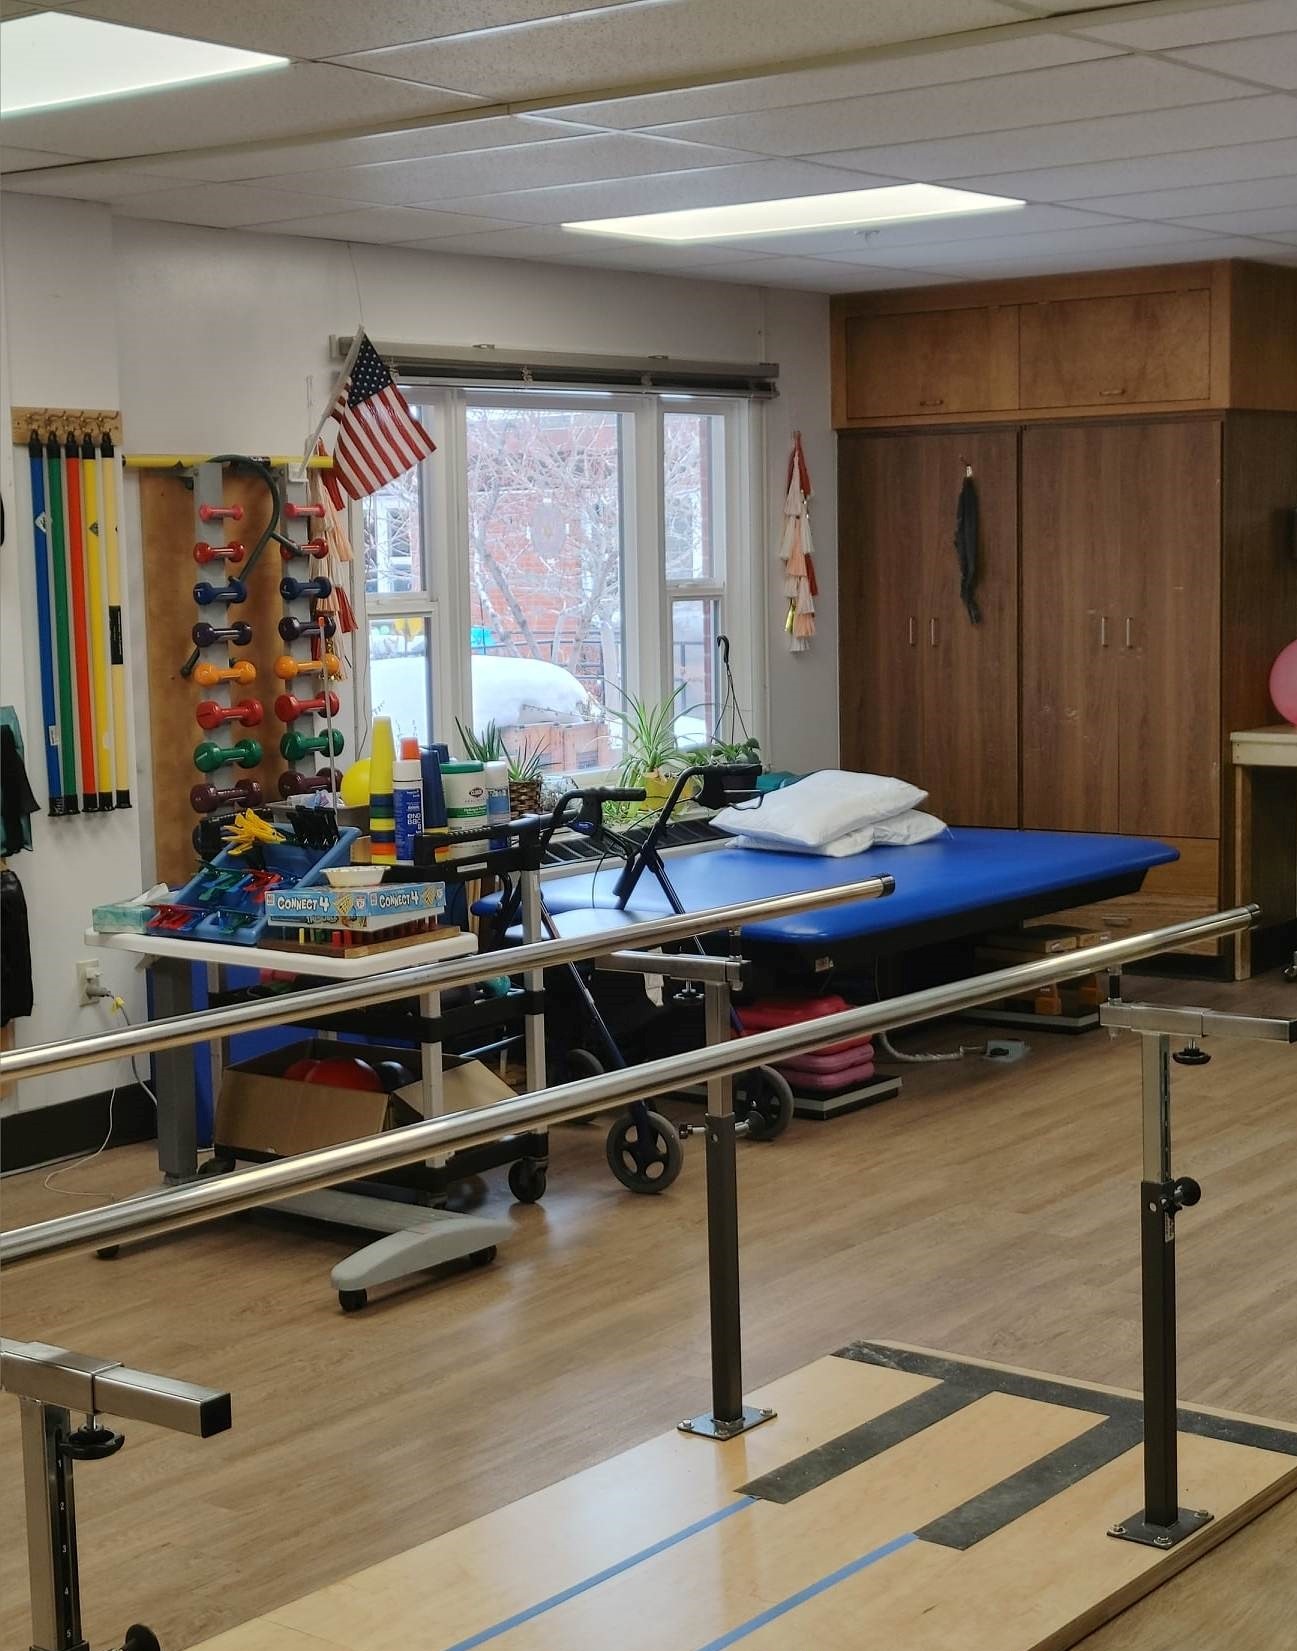 A picture of the therapy room. There is a window, weights, and other fitness and therapy tools. There are also games, such as connect 4.